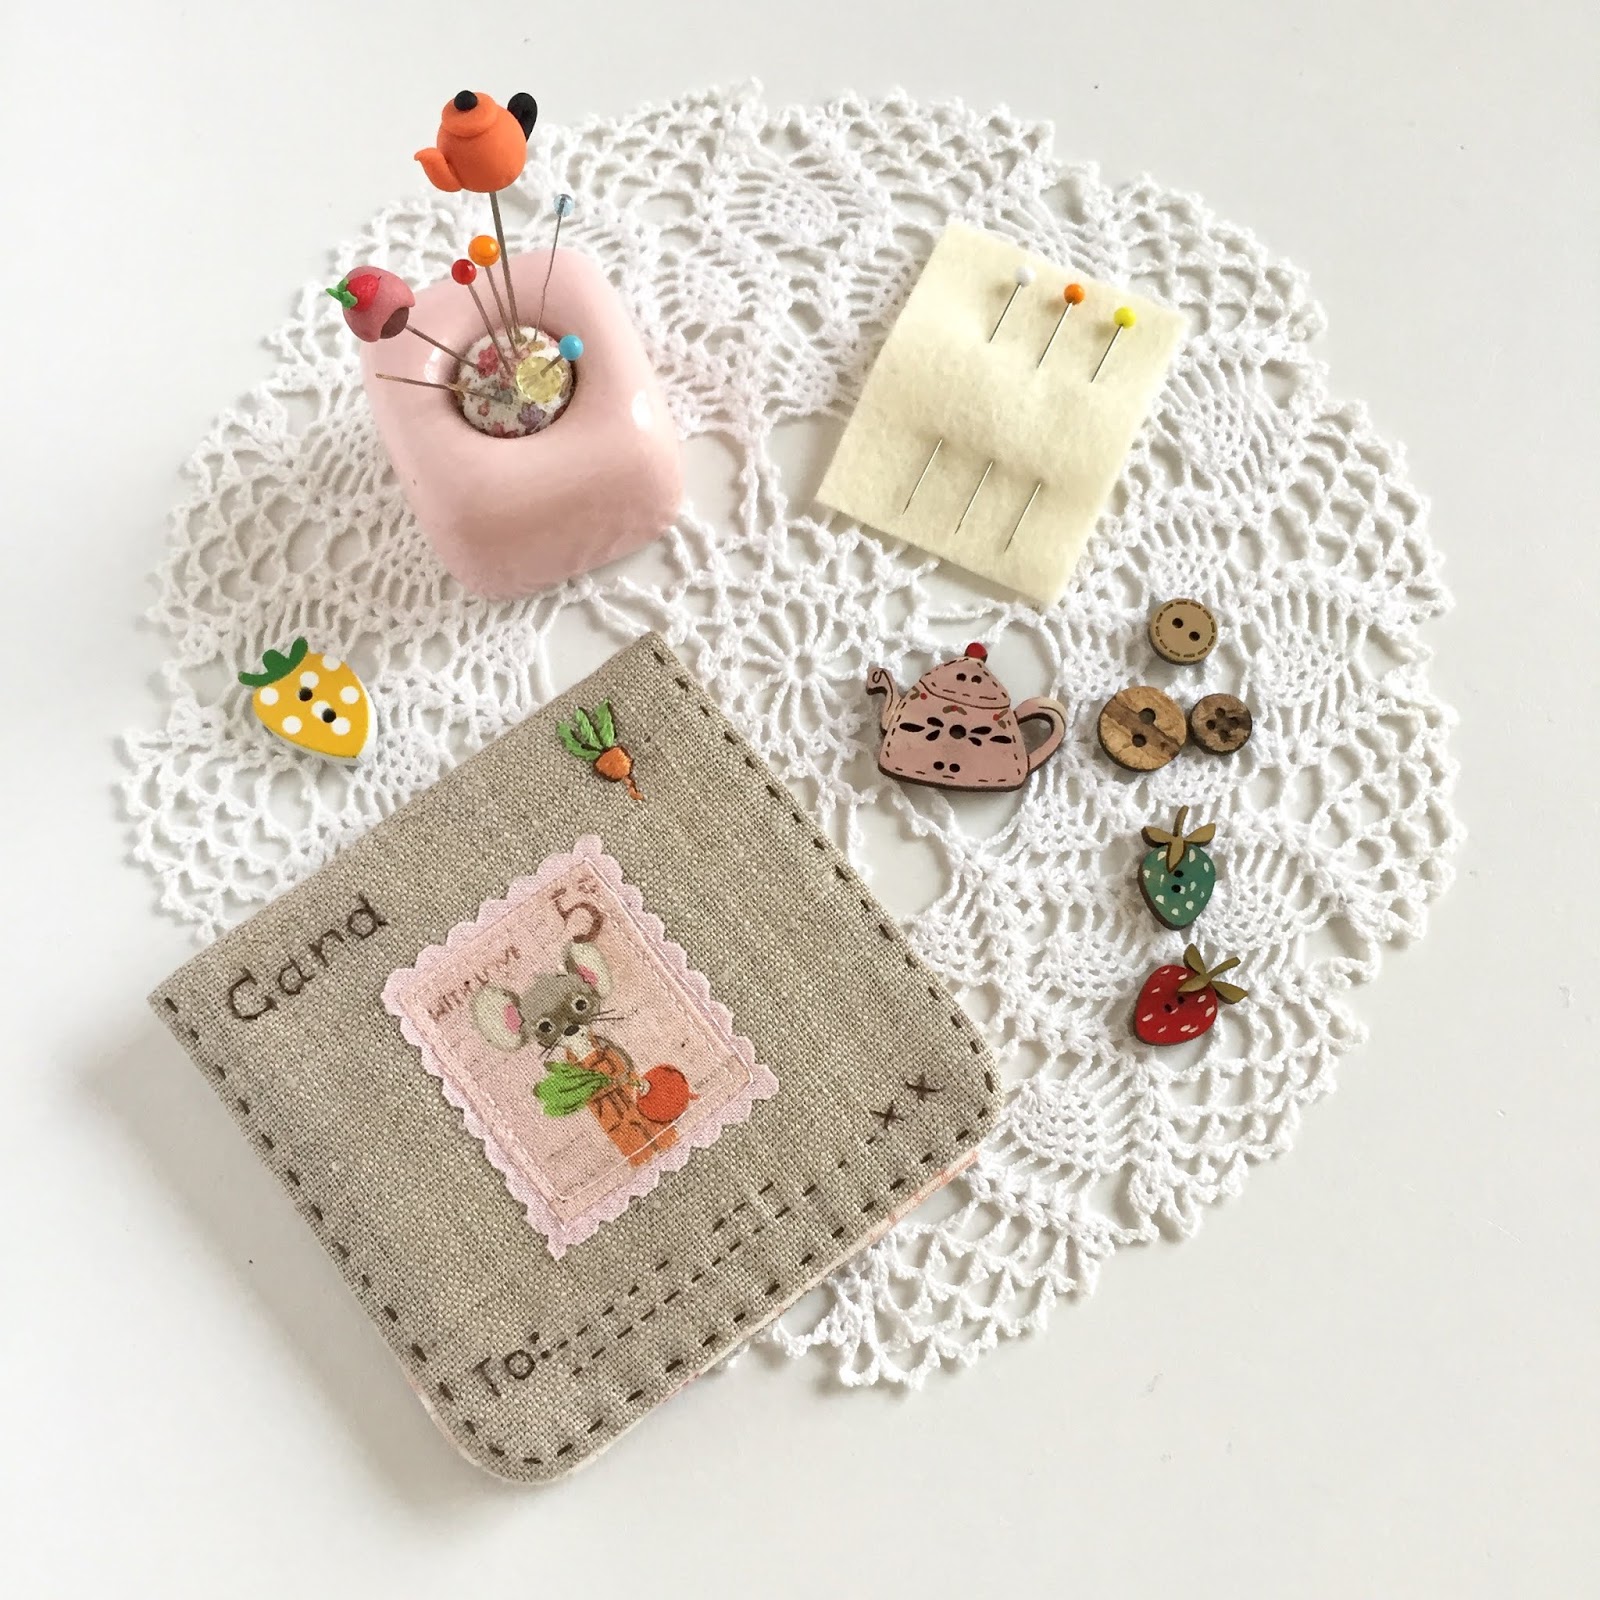 Organize Your Embroidery Notions with a Hand-Stitched Felt Needle